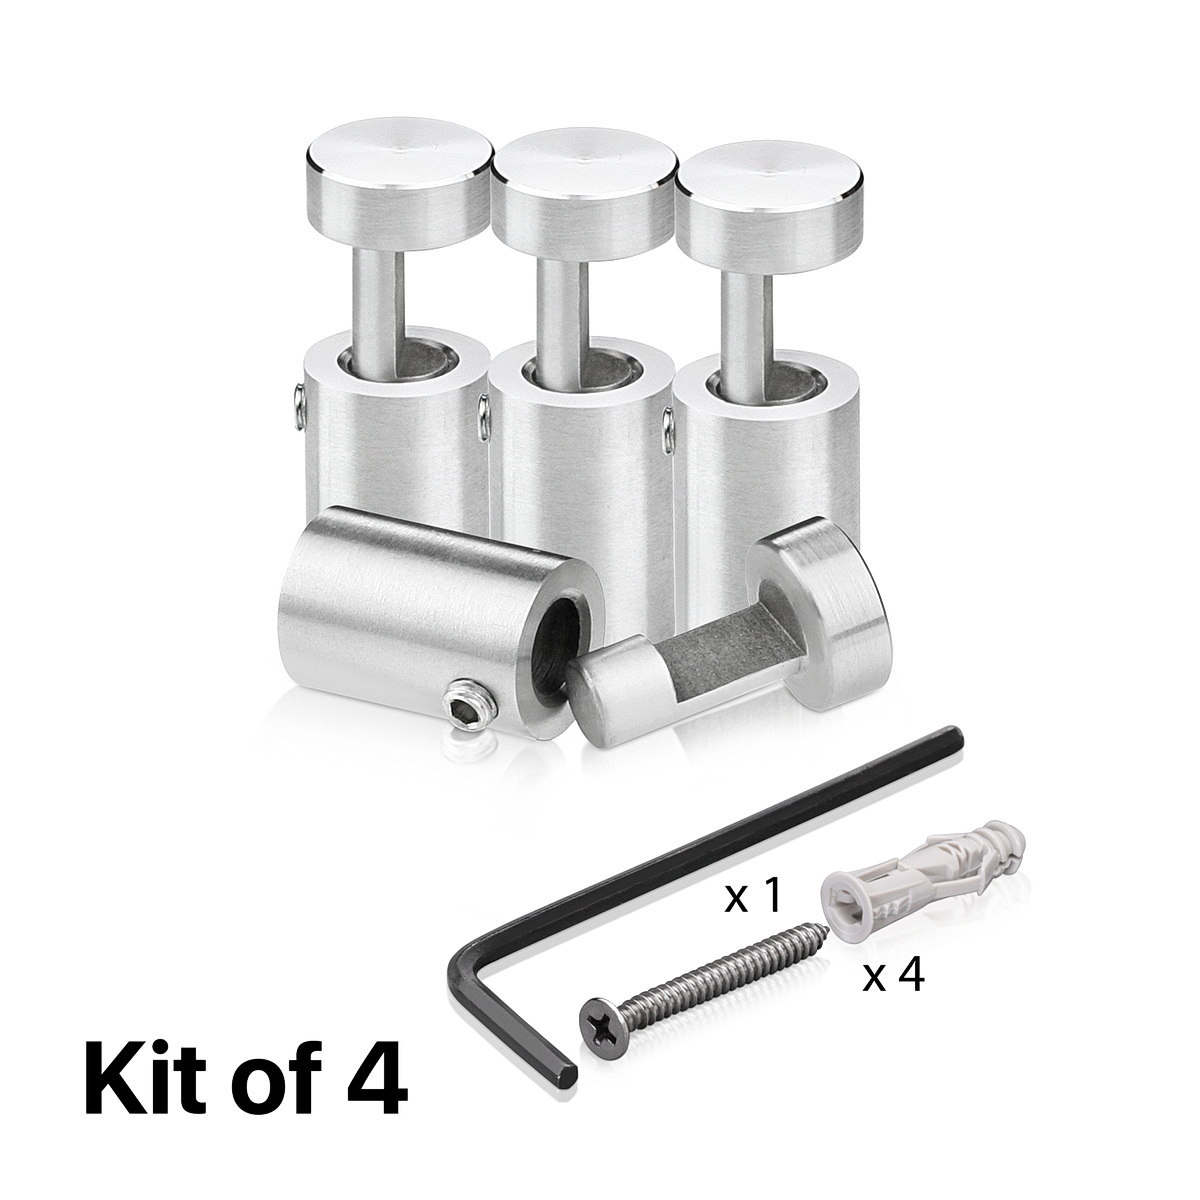 (Set of 4) 1/2'' Diameter X 3/4'' Barrel Length, Stainless Steel Satin Brushed Finish. Adjustable Edge Grip Standoff with (4) 2208Z Screw and (4) LANC1 Anchor  for concrete/drywall (For Inside Use Only)